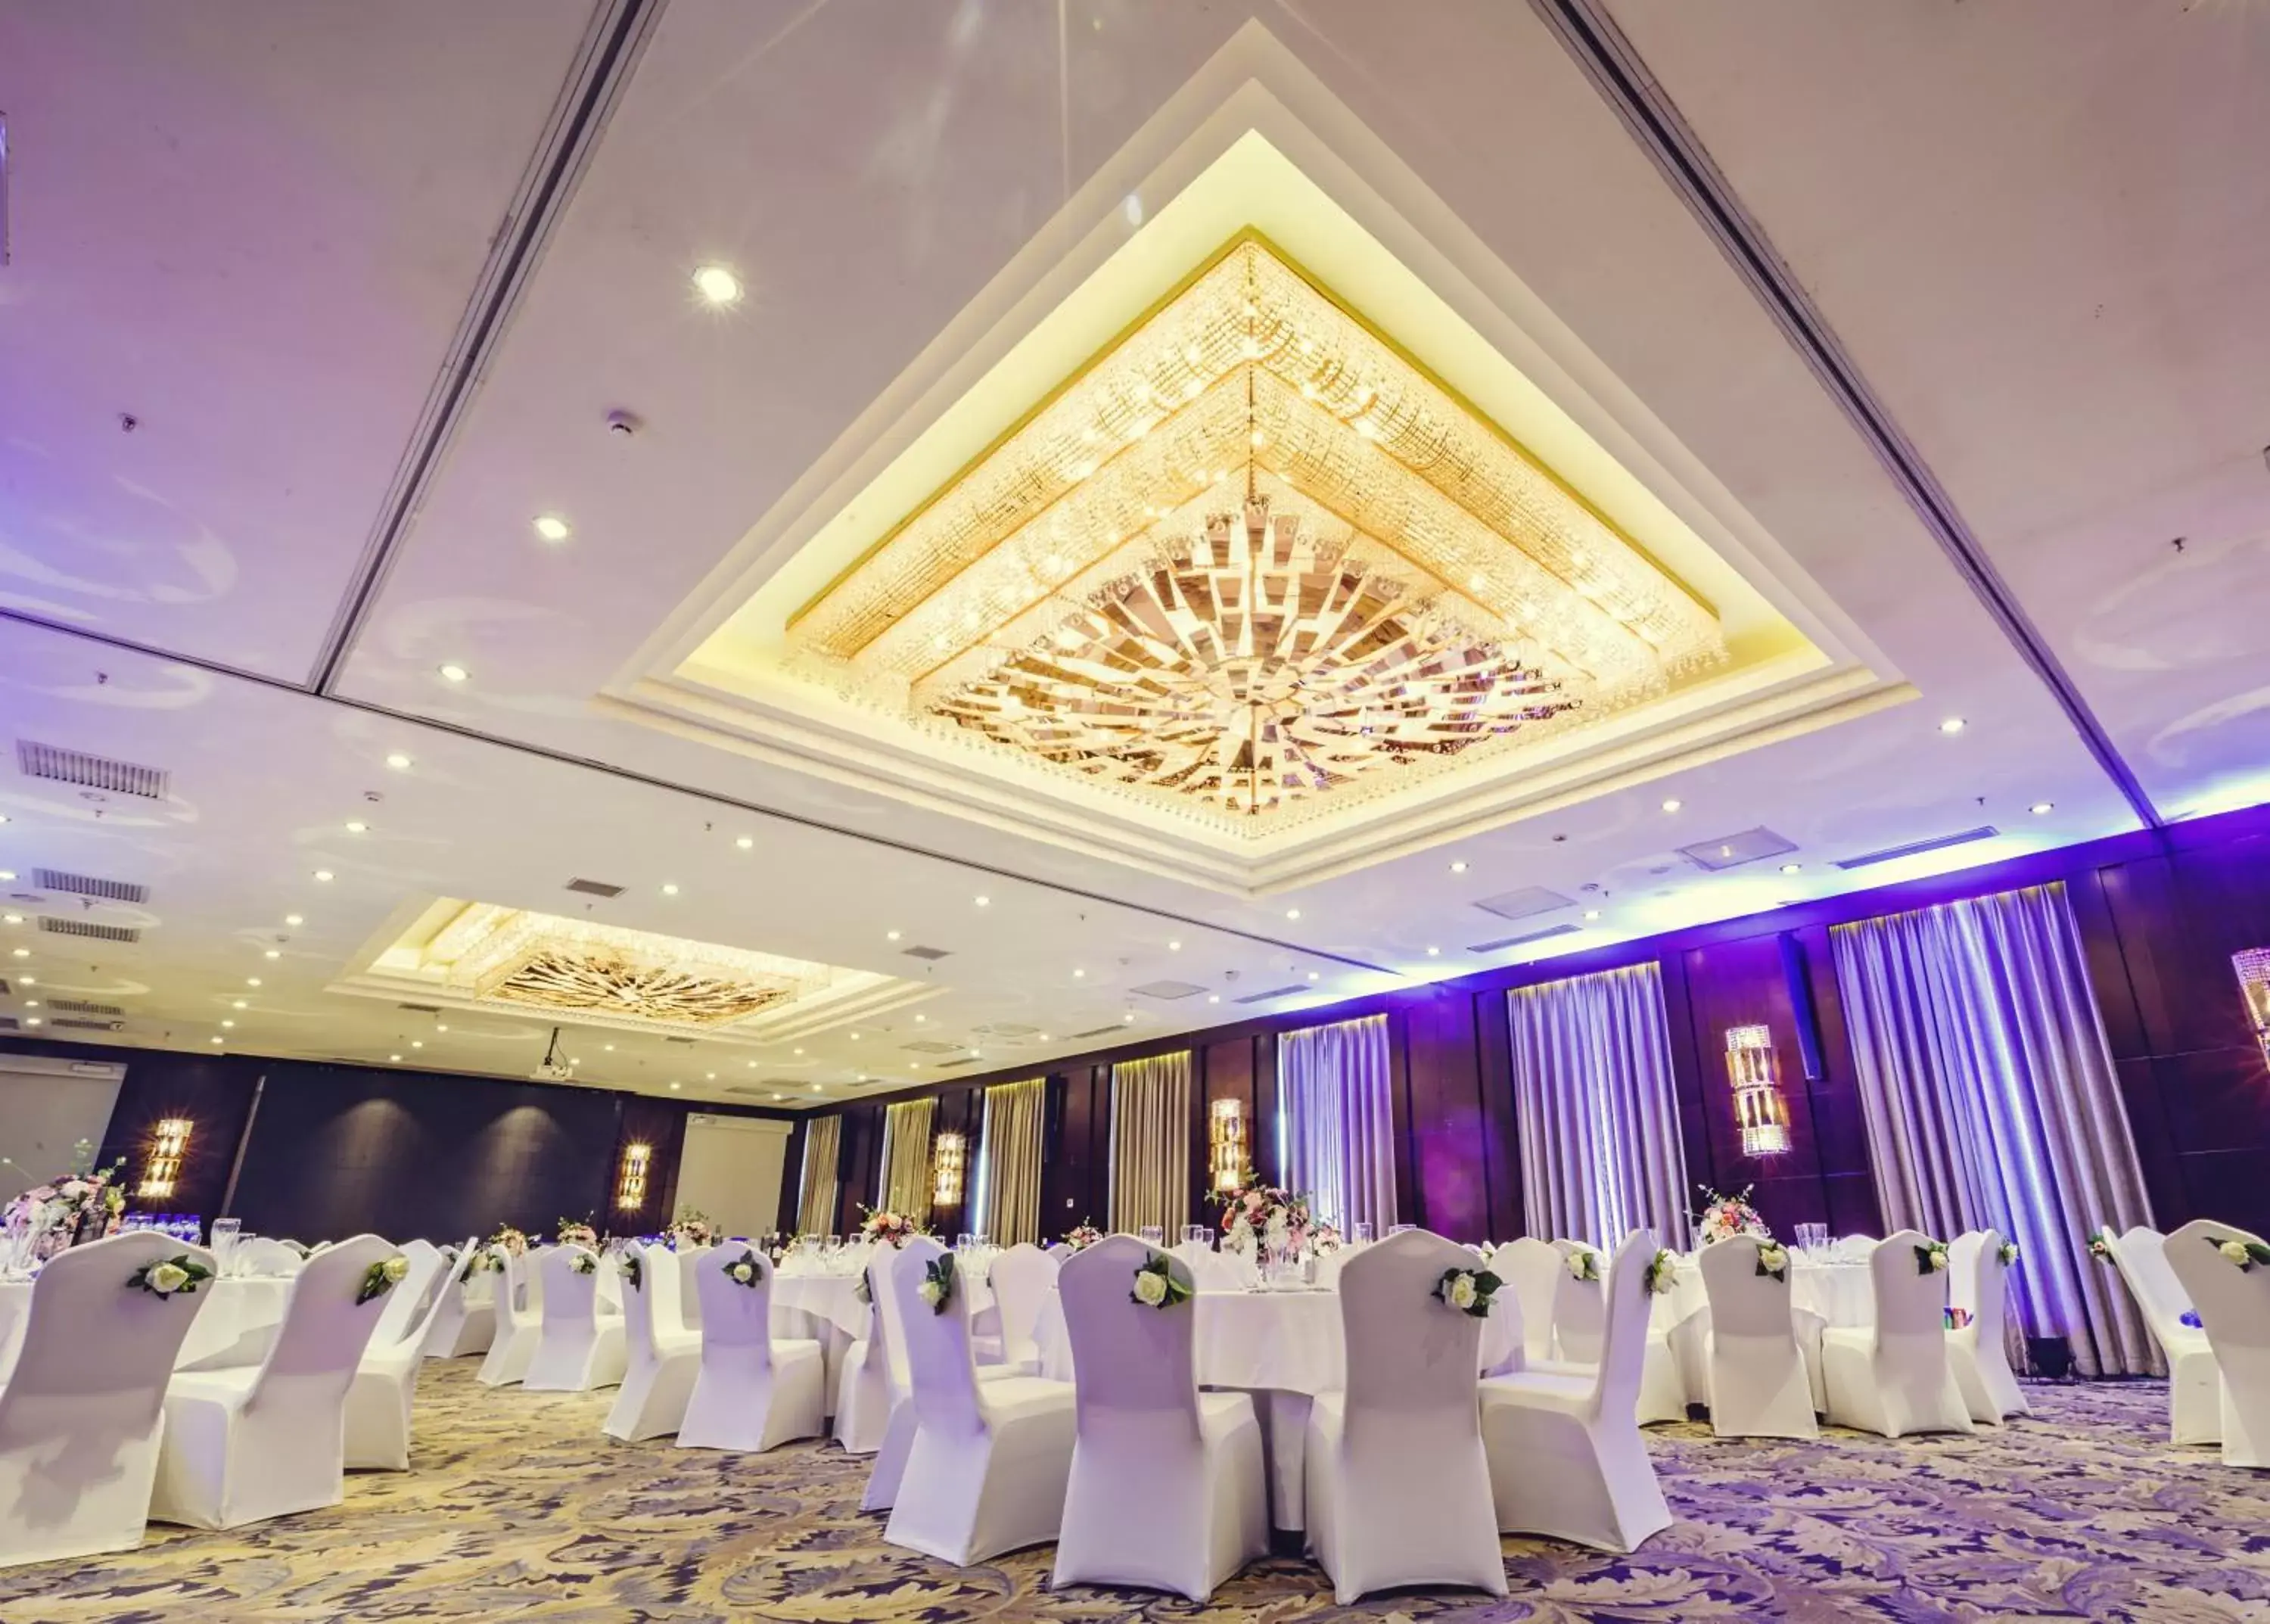 Banquet/Function facilities, Banquet Facilities in Best Western Premier Tuushin Hotel